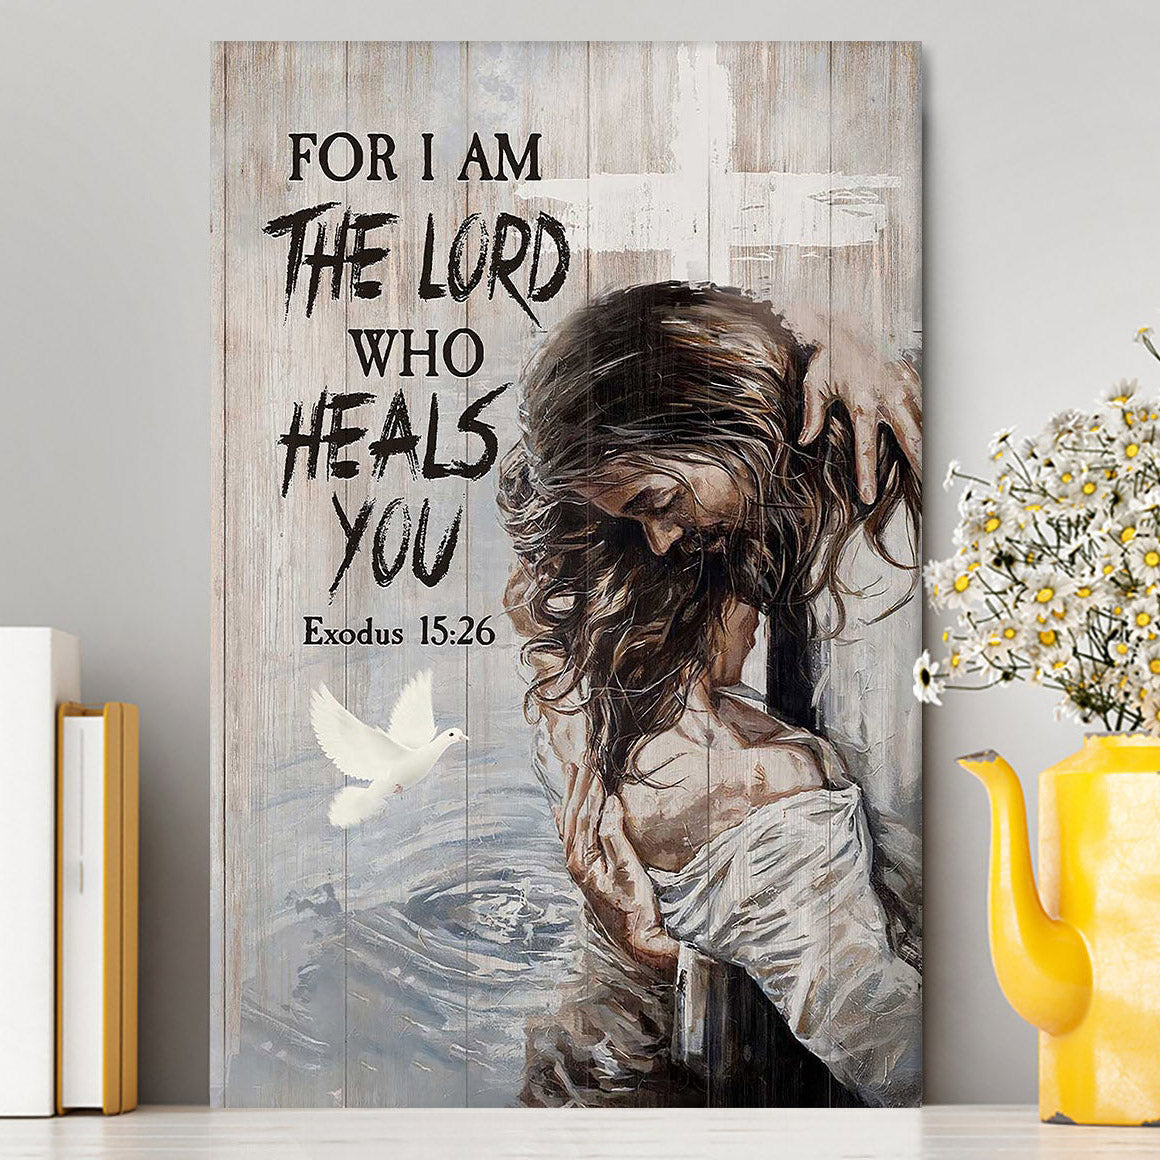 Jesus For I Am The Lord Who Heals You Canvas Art - Christian Art - Bible Verse Wall Art - Religious Home Decor